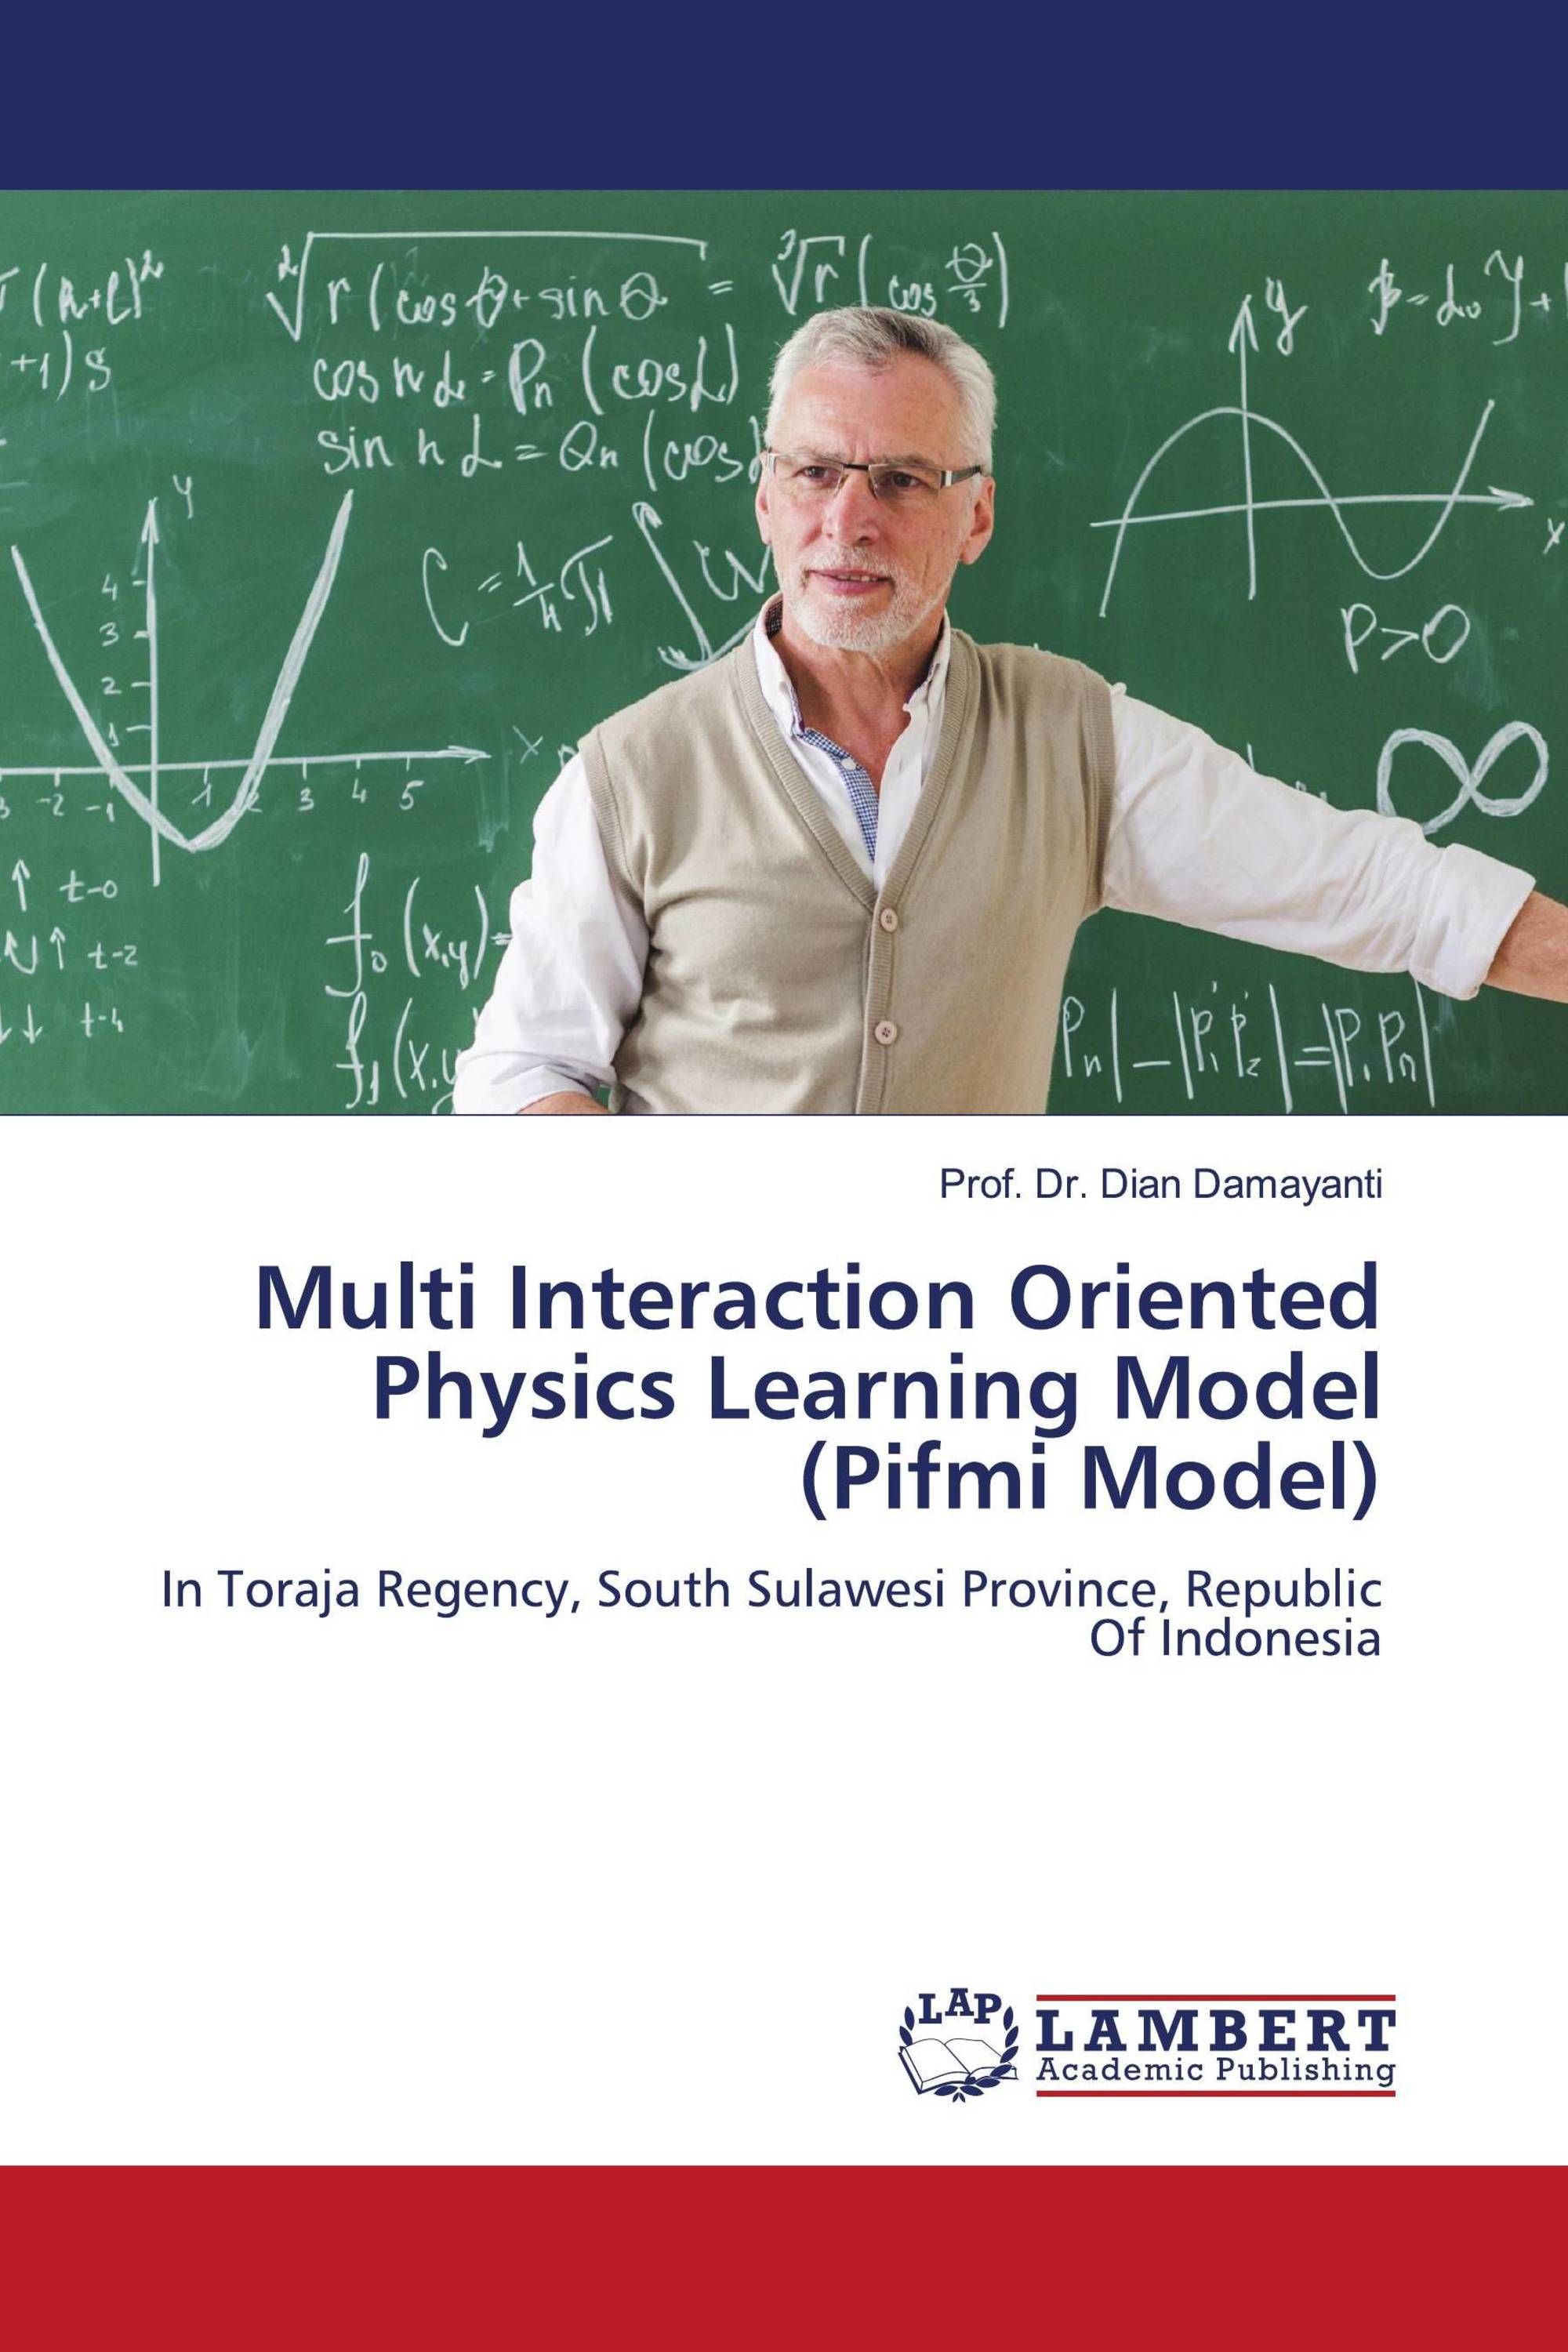 Multi Interaction Oriented Physics Learning Model (Pifmi Model)